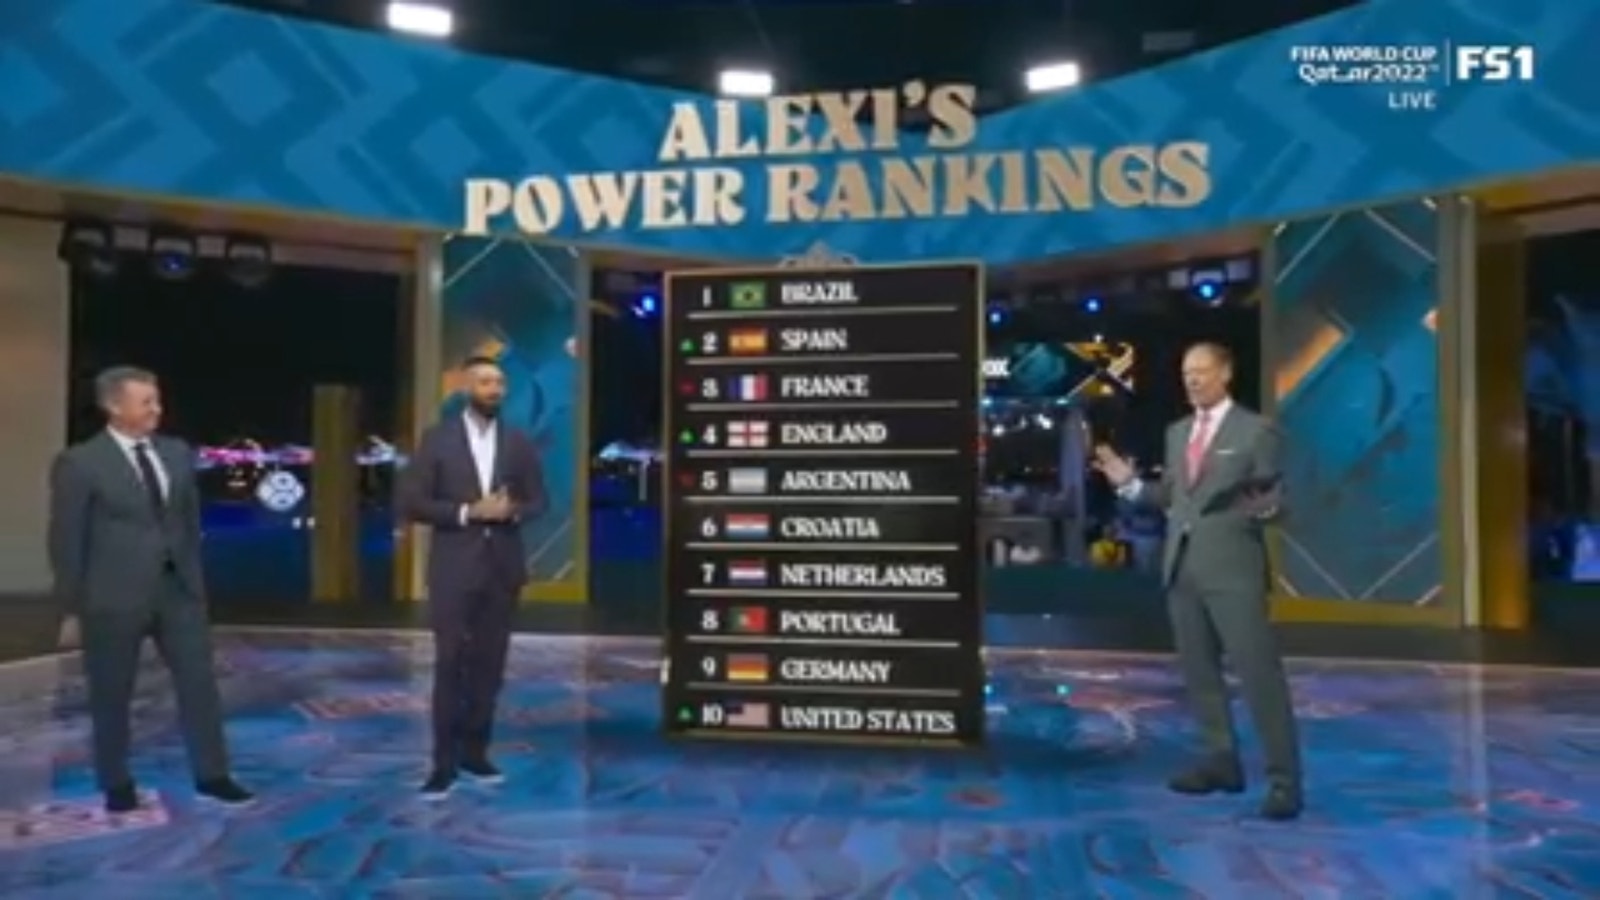 England, Spain and USMNT move up in Alexi Lalas' World Cup power rankings